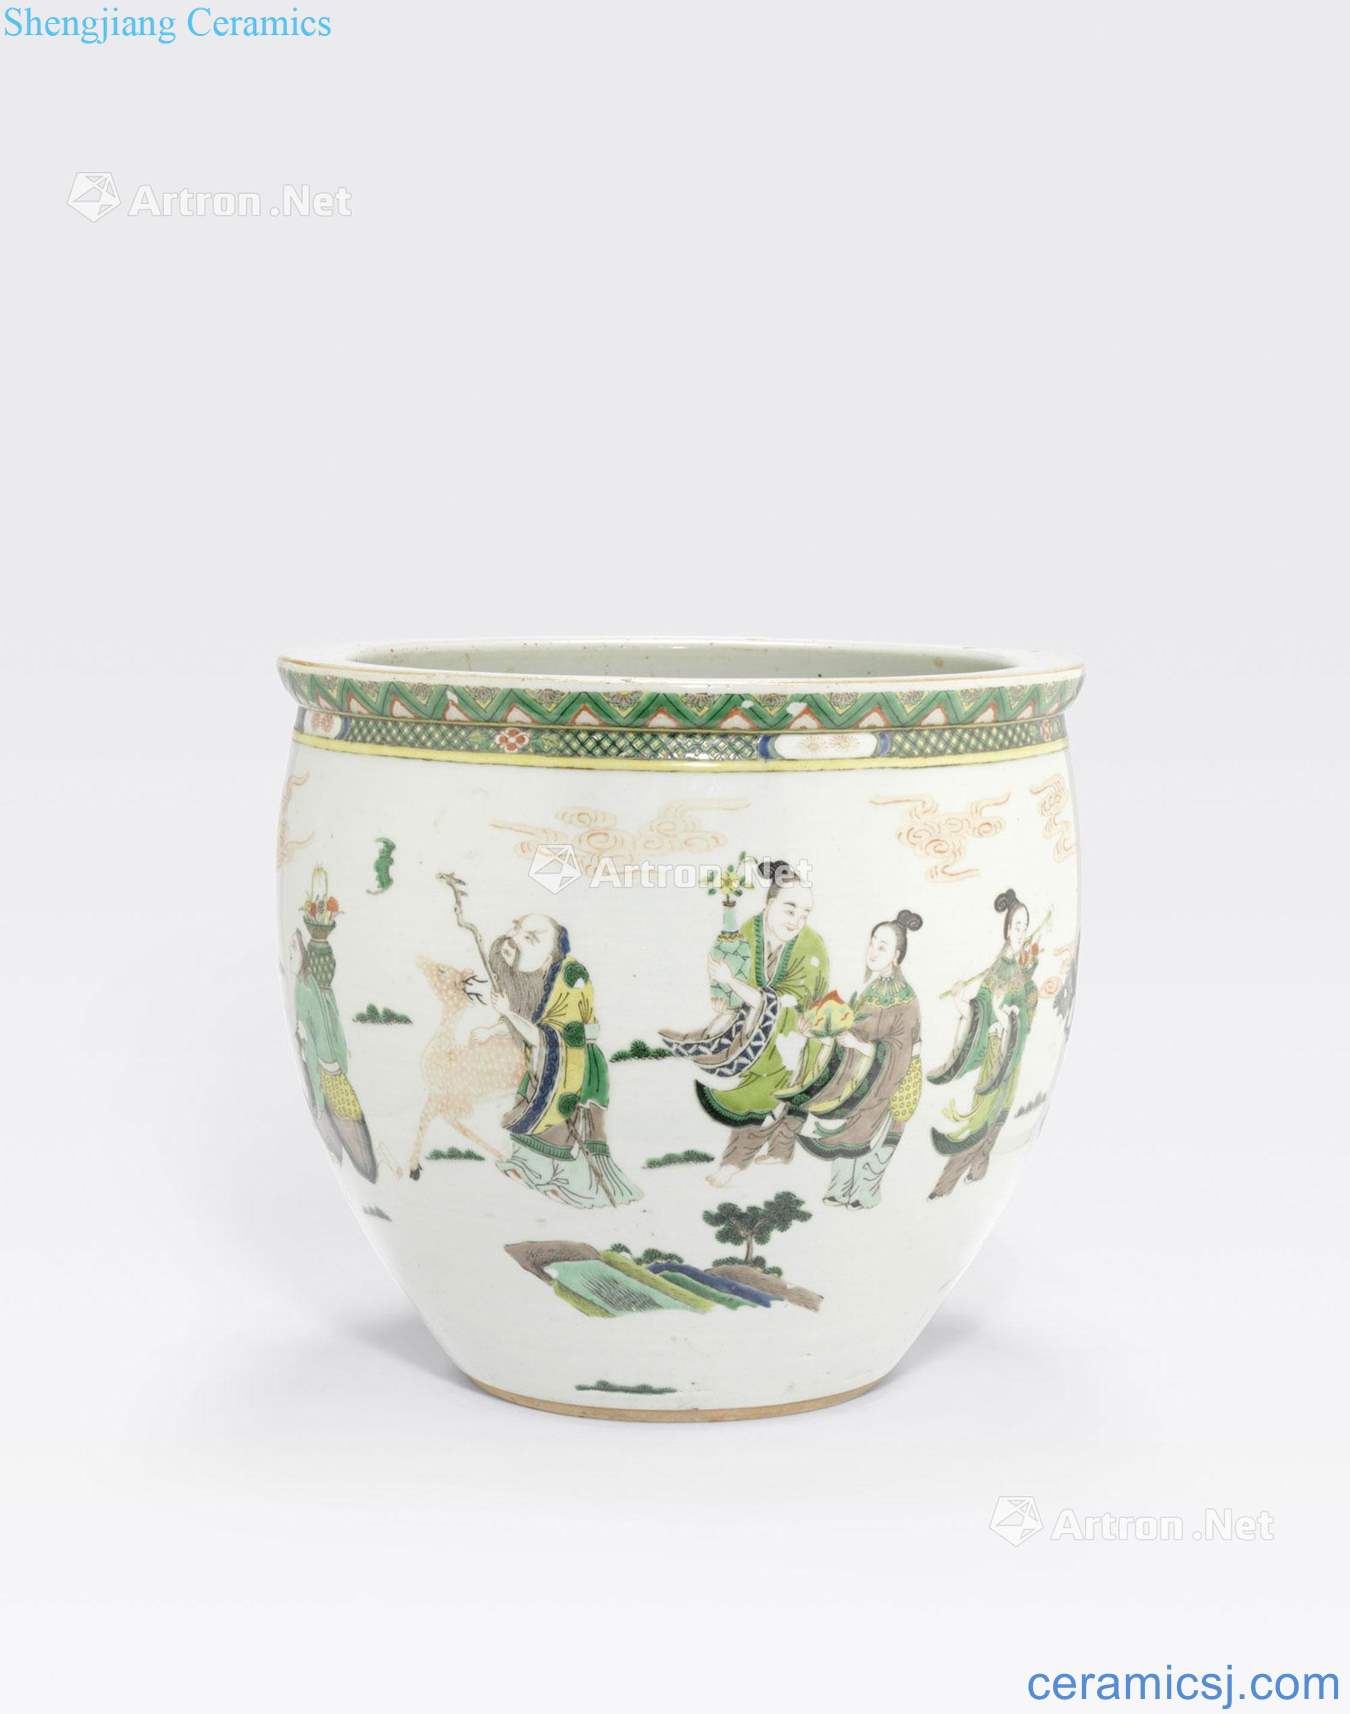 The 19 th century A FAMILLE VERTE ENAMELED JARDINIERE